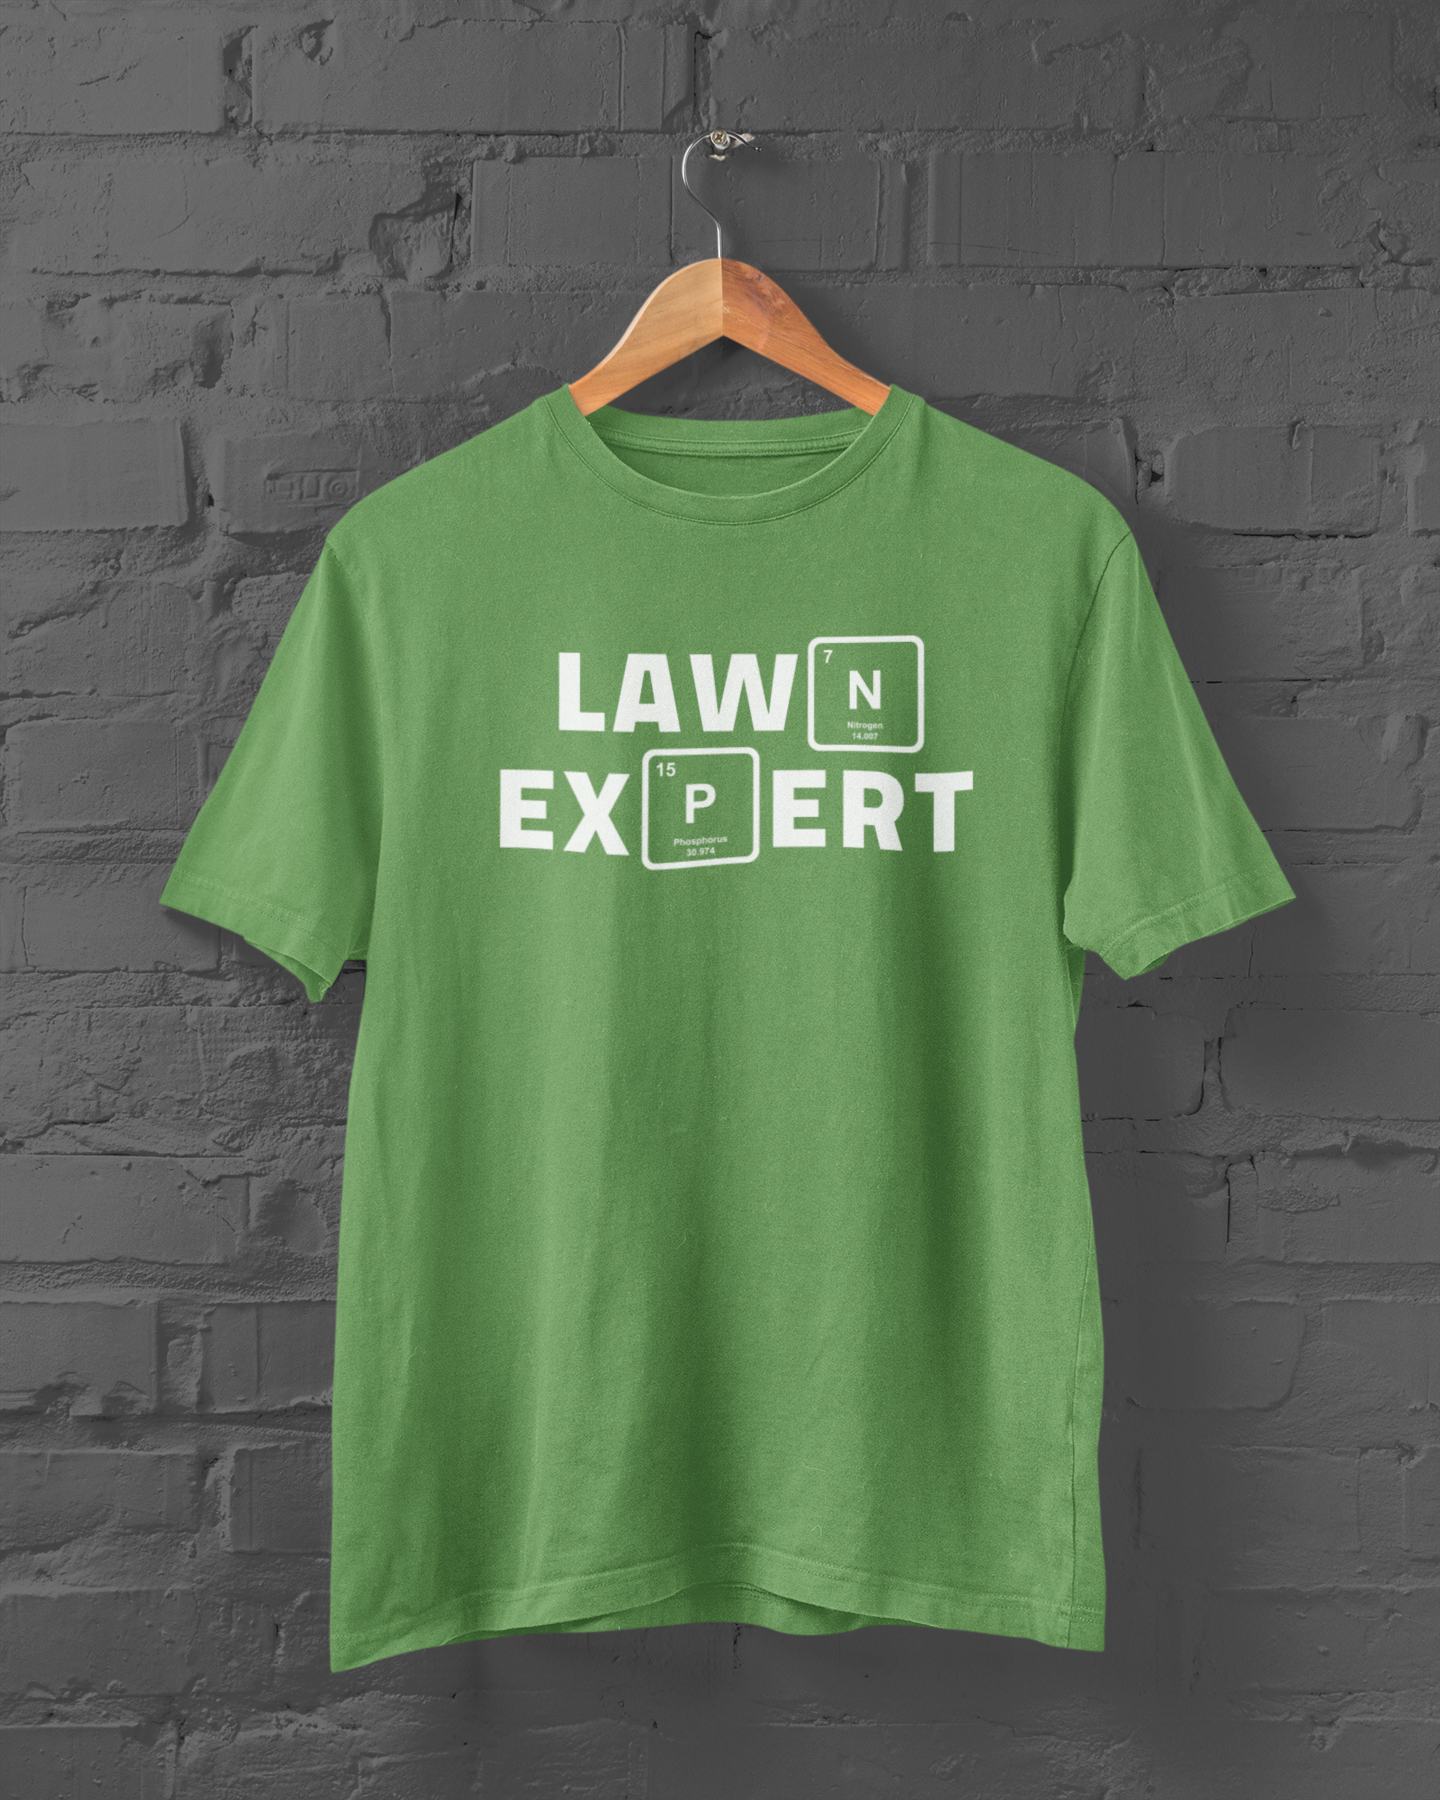 Working on lawns and being a landscaper involves hard work and a little bit of chemistry. Show off your talents with this chemistry inspired Lawn Expert t-shirt by Landscaper Apparel